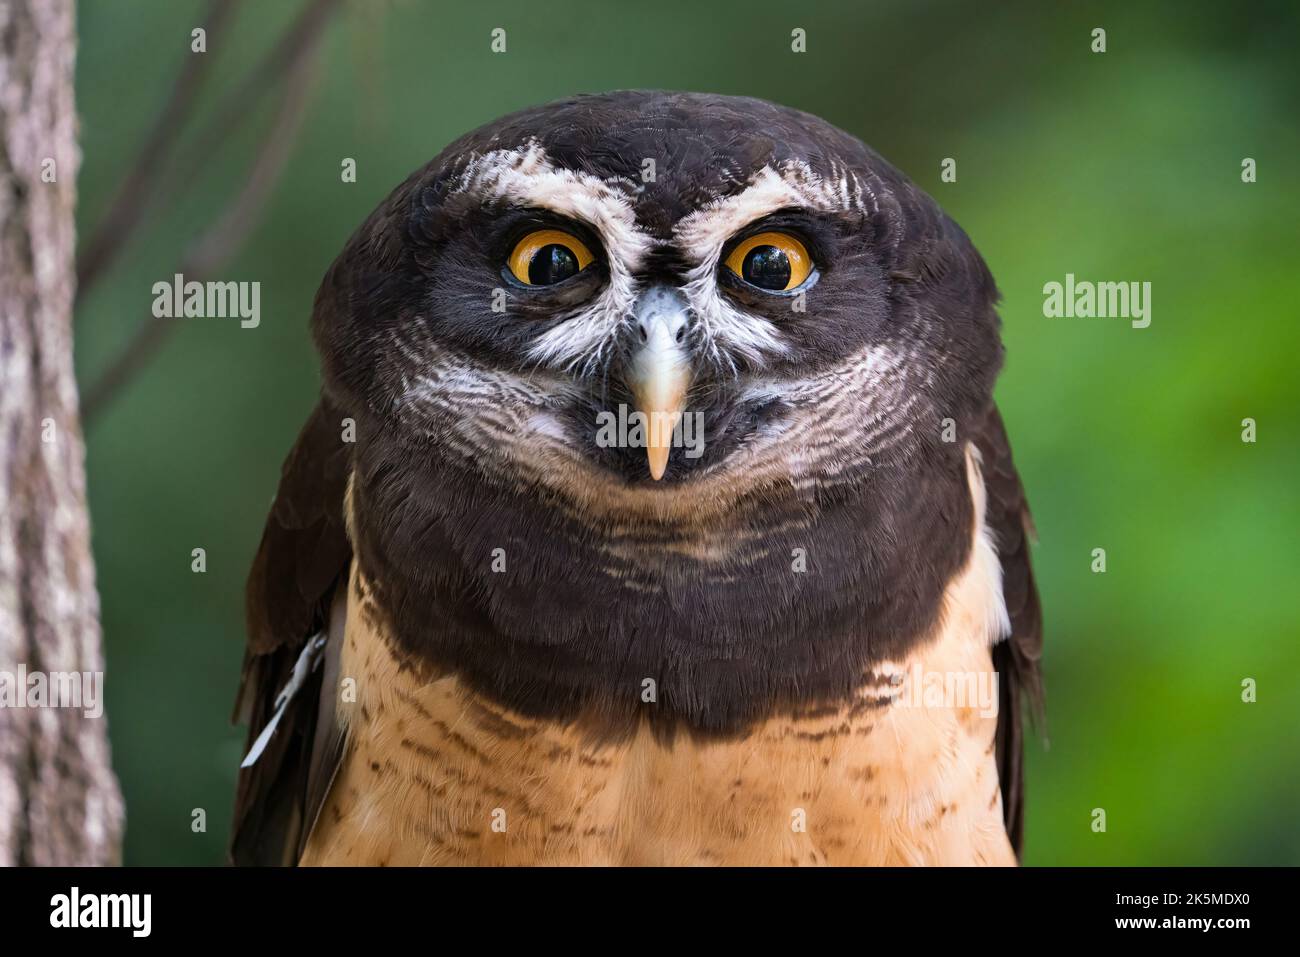 A spectacled owl portrait Stock Photo